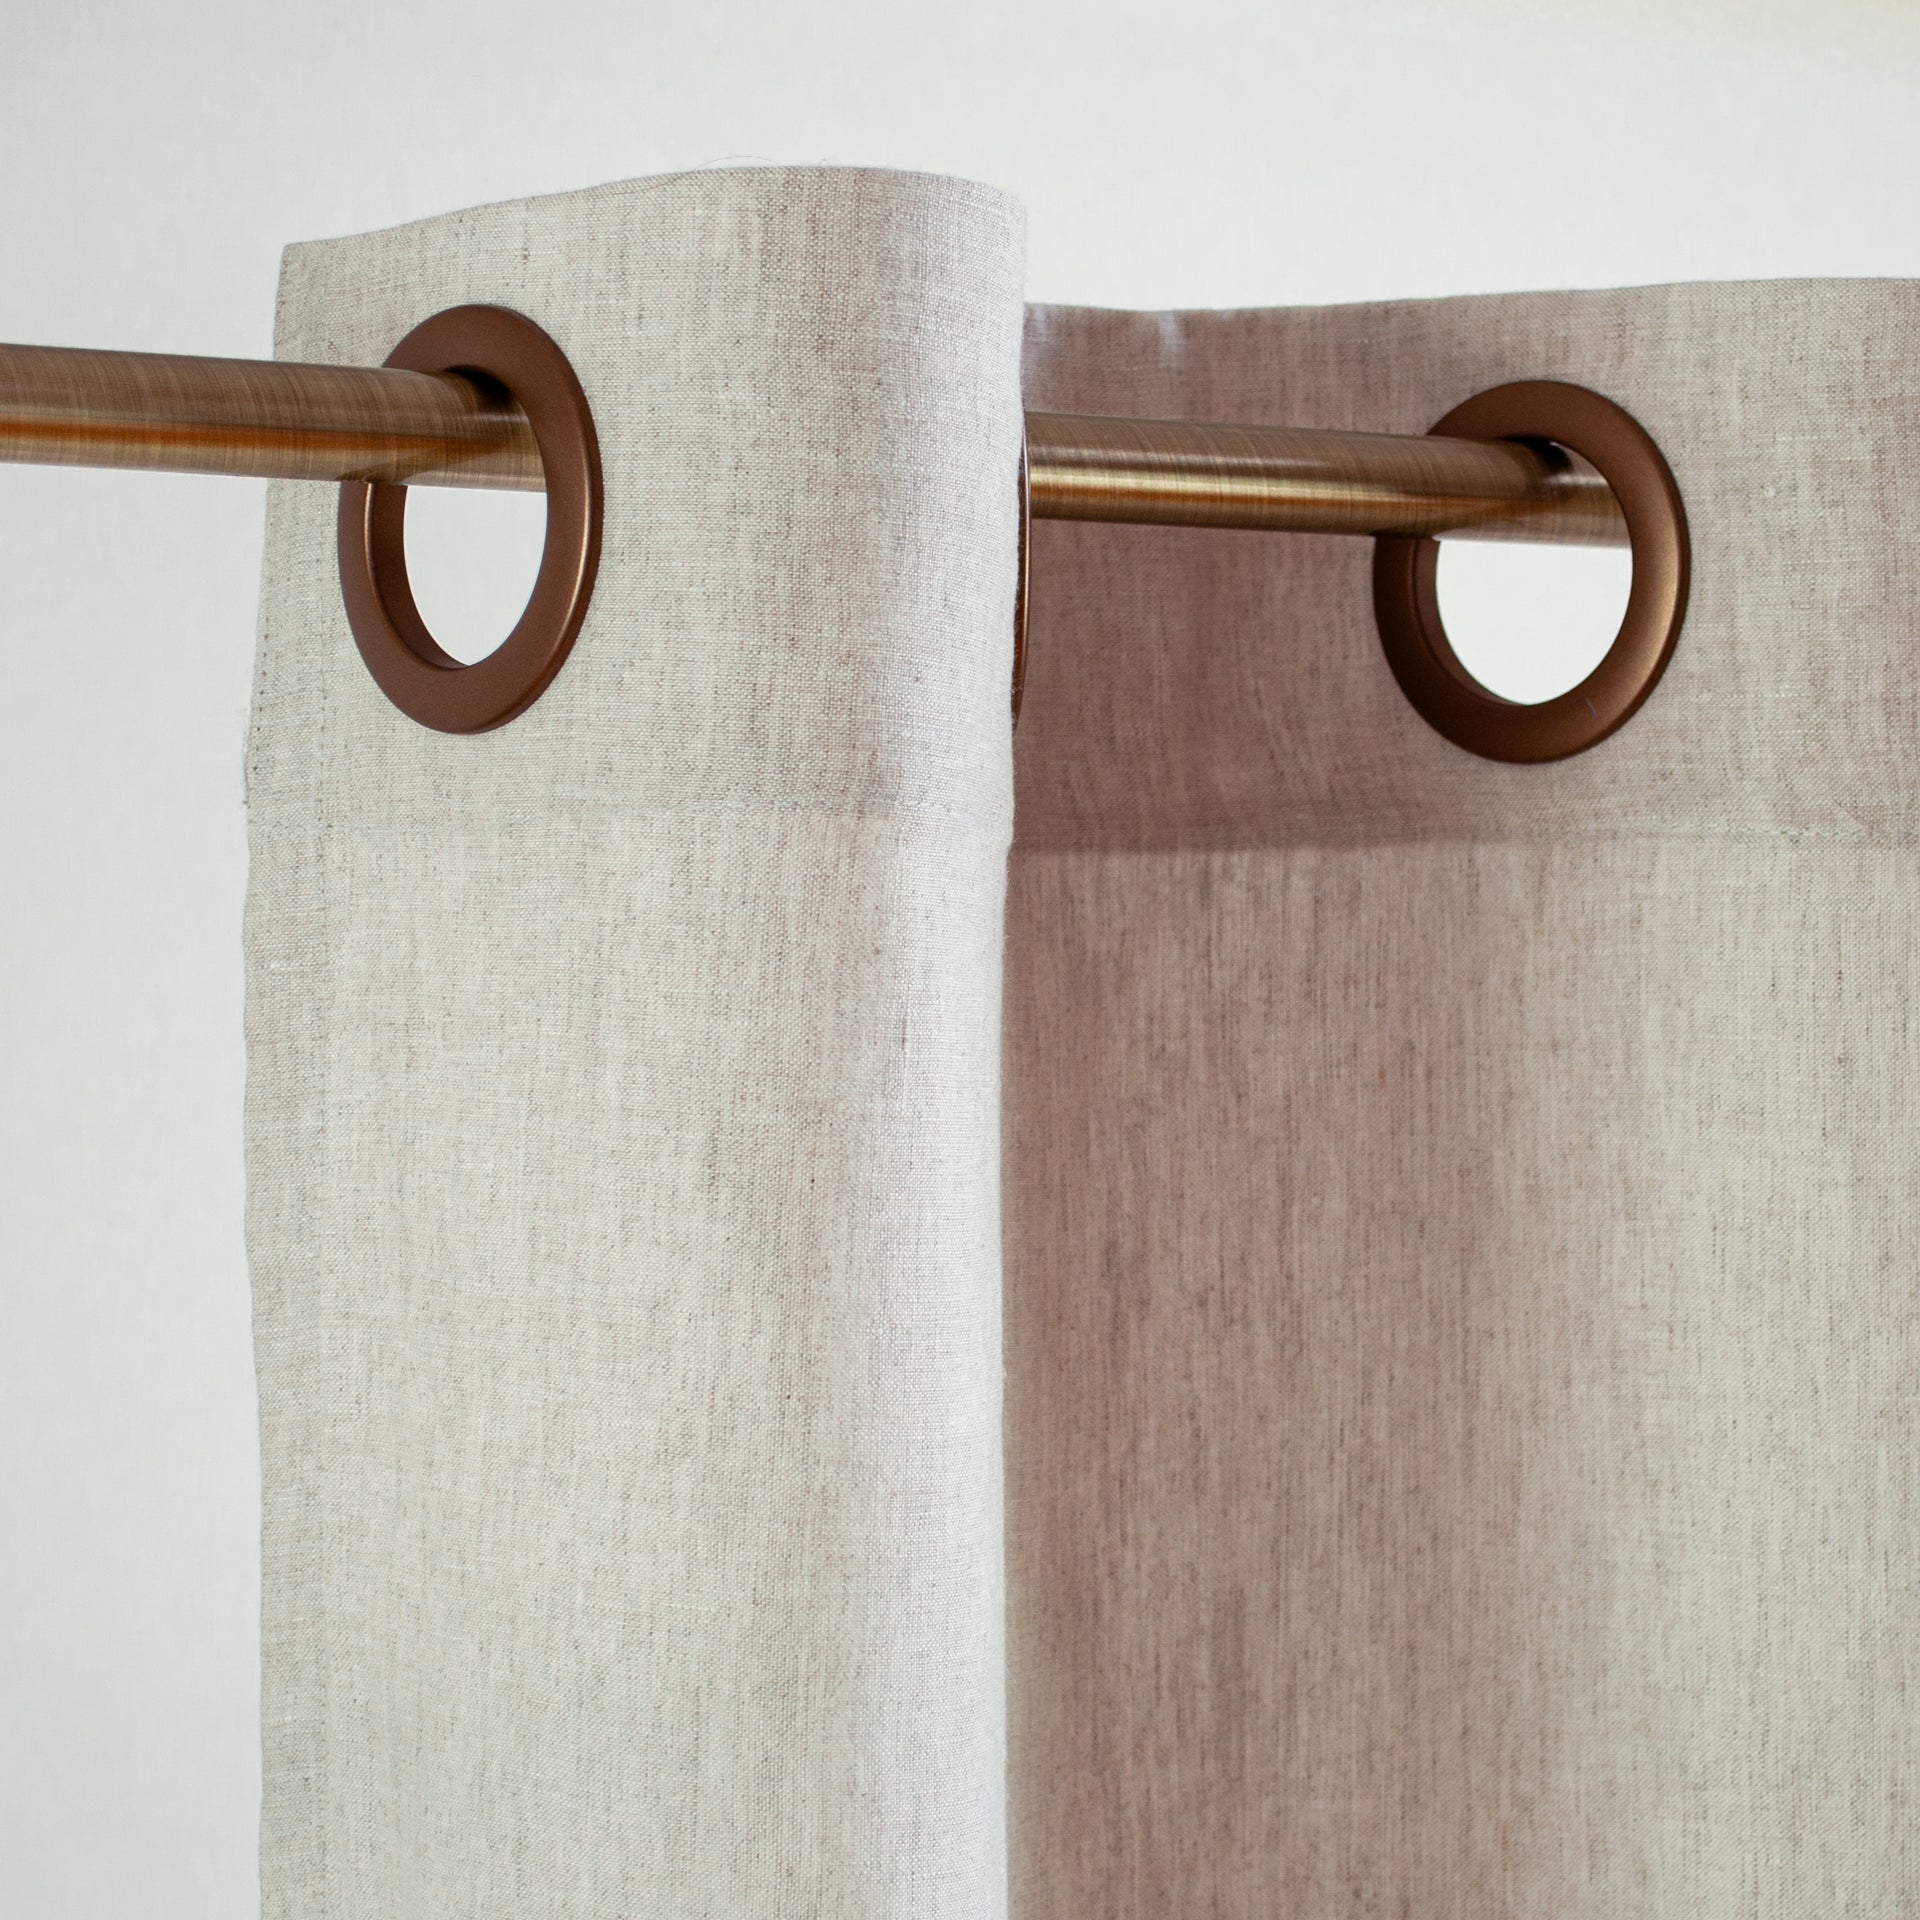 Eyelet Linen Curtain Panel with Blackout Lining - Linen Window Treatments - Grommet Top Drapes